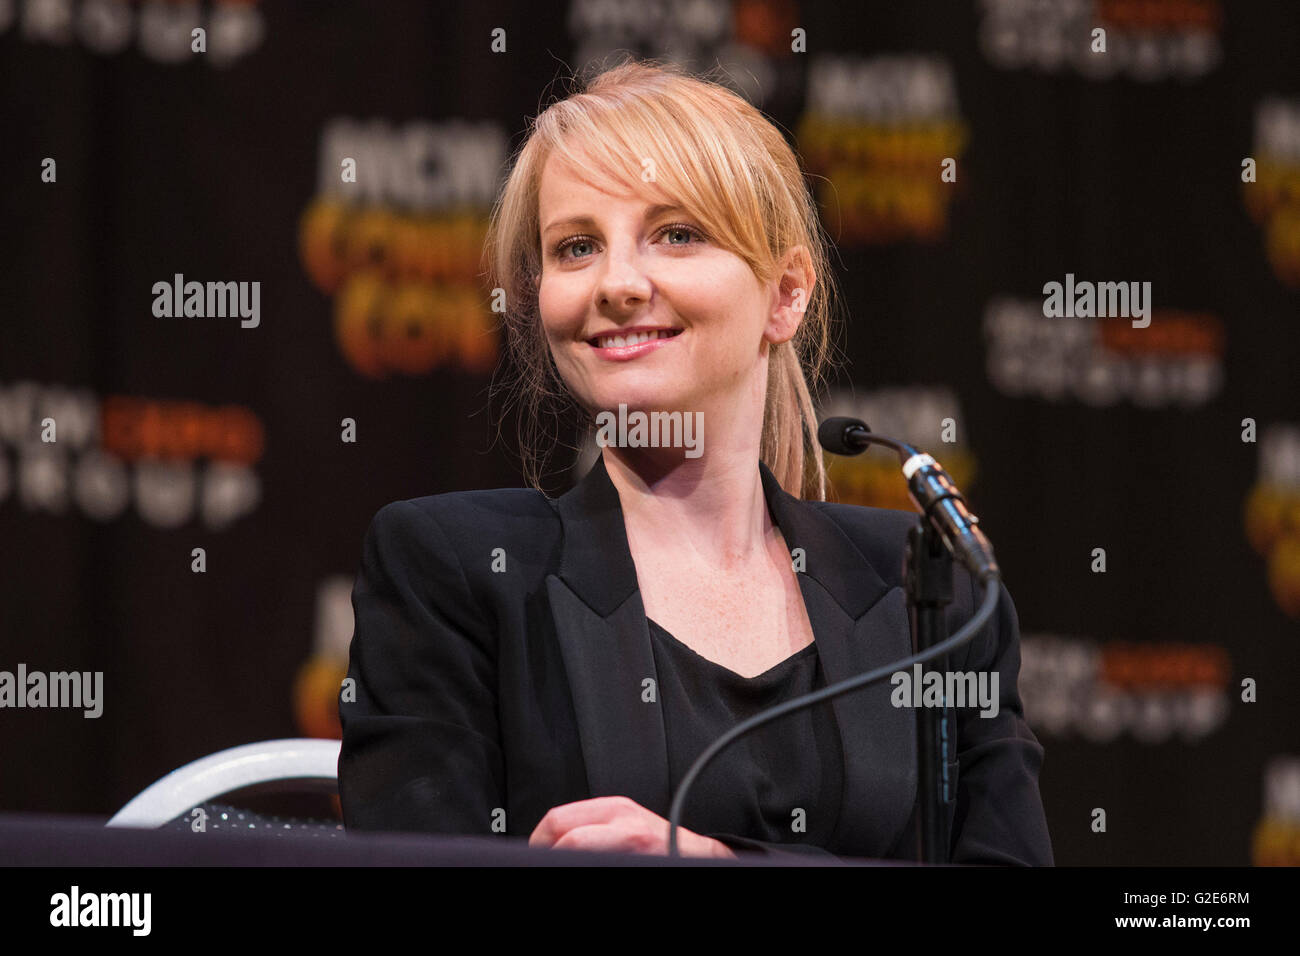 London, UK. 29 May 2016. Pictured: actress Melissa Rauch (Bernadette of The Big Bang Theory). Actors Jesse Eisenberg, Kunal Nayyar and Melissa Rauch (both of The Big Bang Theory) take part in a panel discussion entitled Lex vs Big Bang. Last day of the MCM London ComicCon at Excel Exhibition Centre. Stock Photo